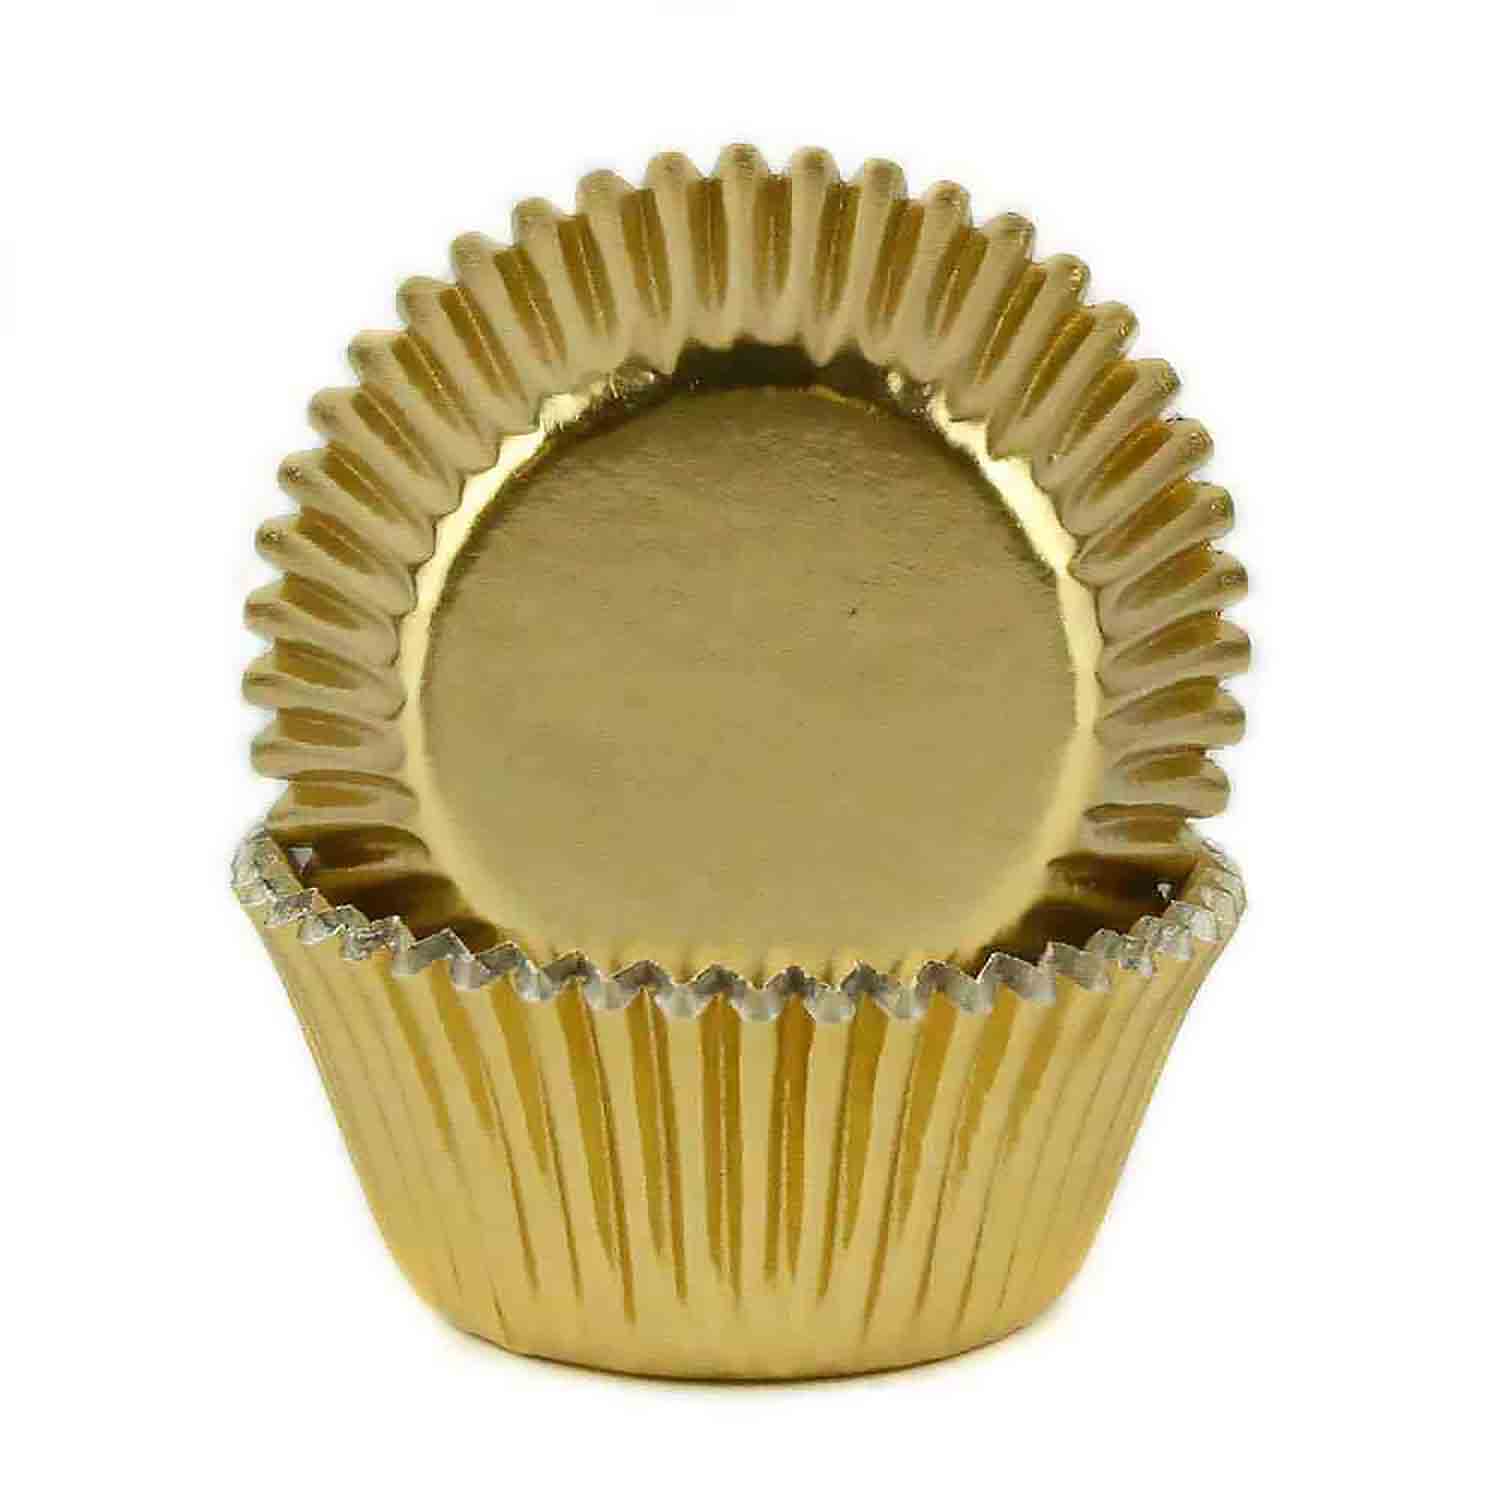 100 Gold Swirl Mini Baking Cups and Paper Liners – The Prepared Pantry